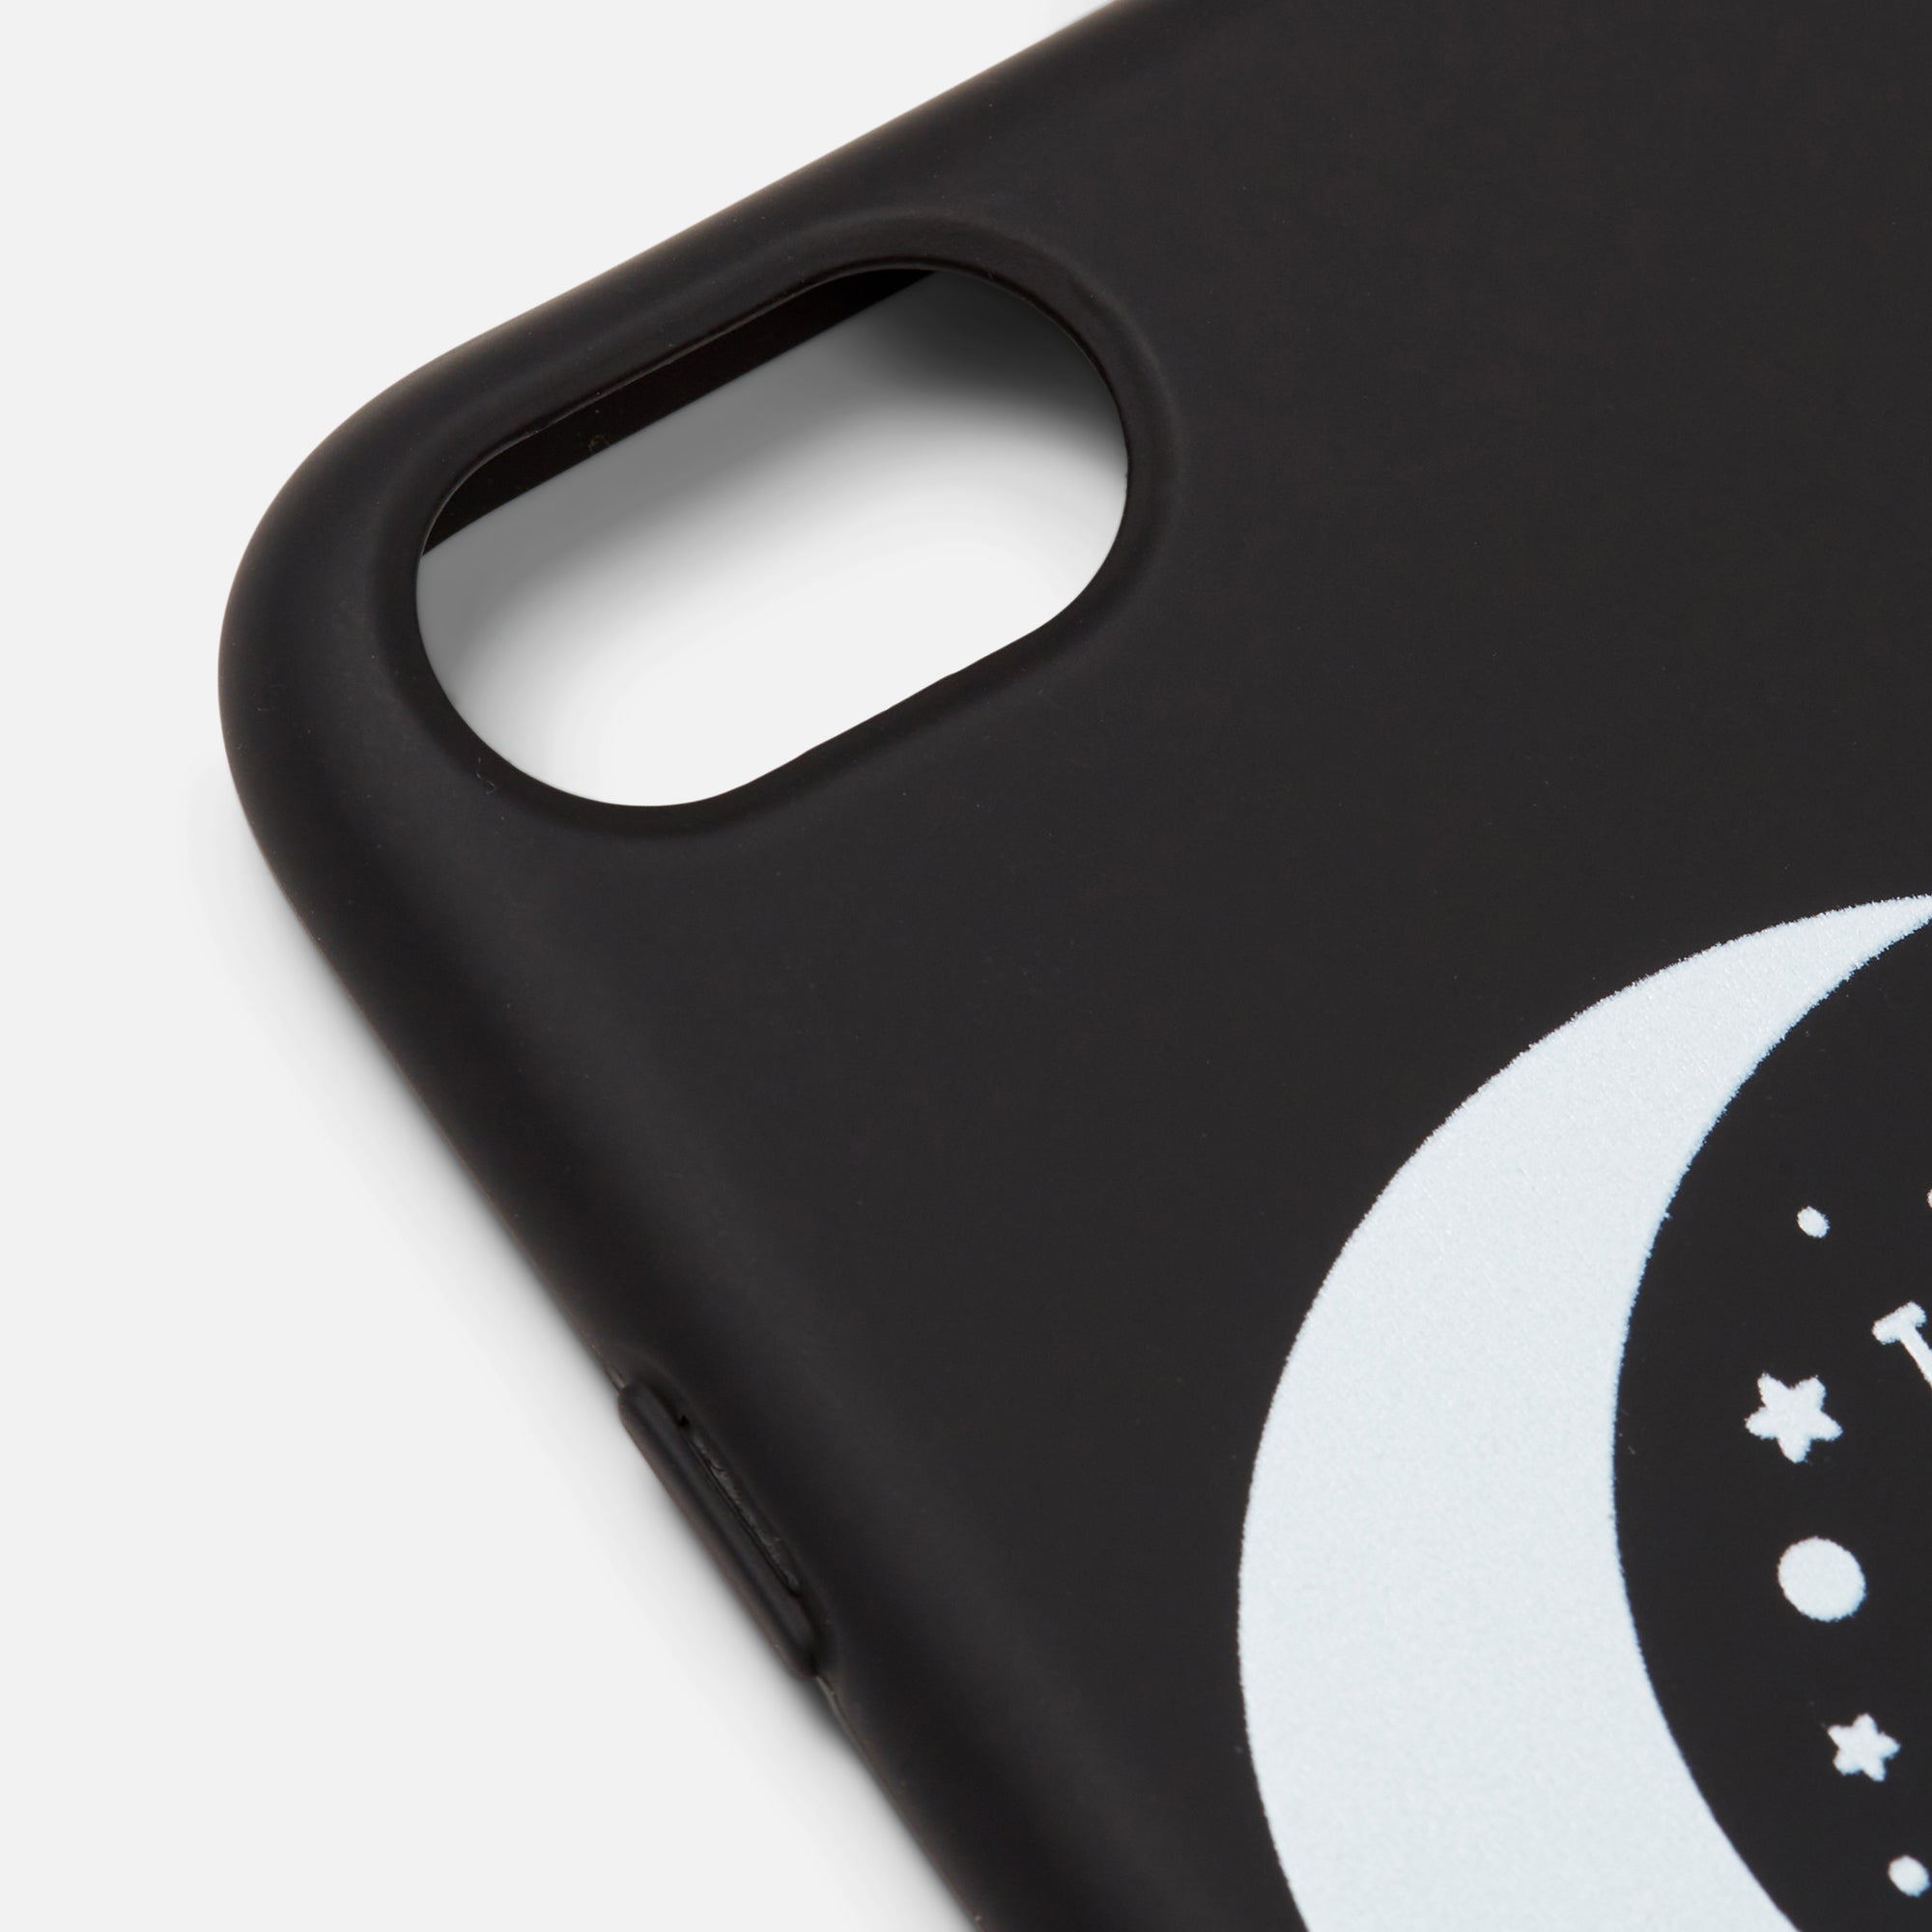 Black Iphone case with ''I love you to the moon and back'' inscription